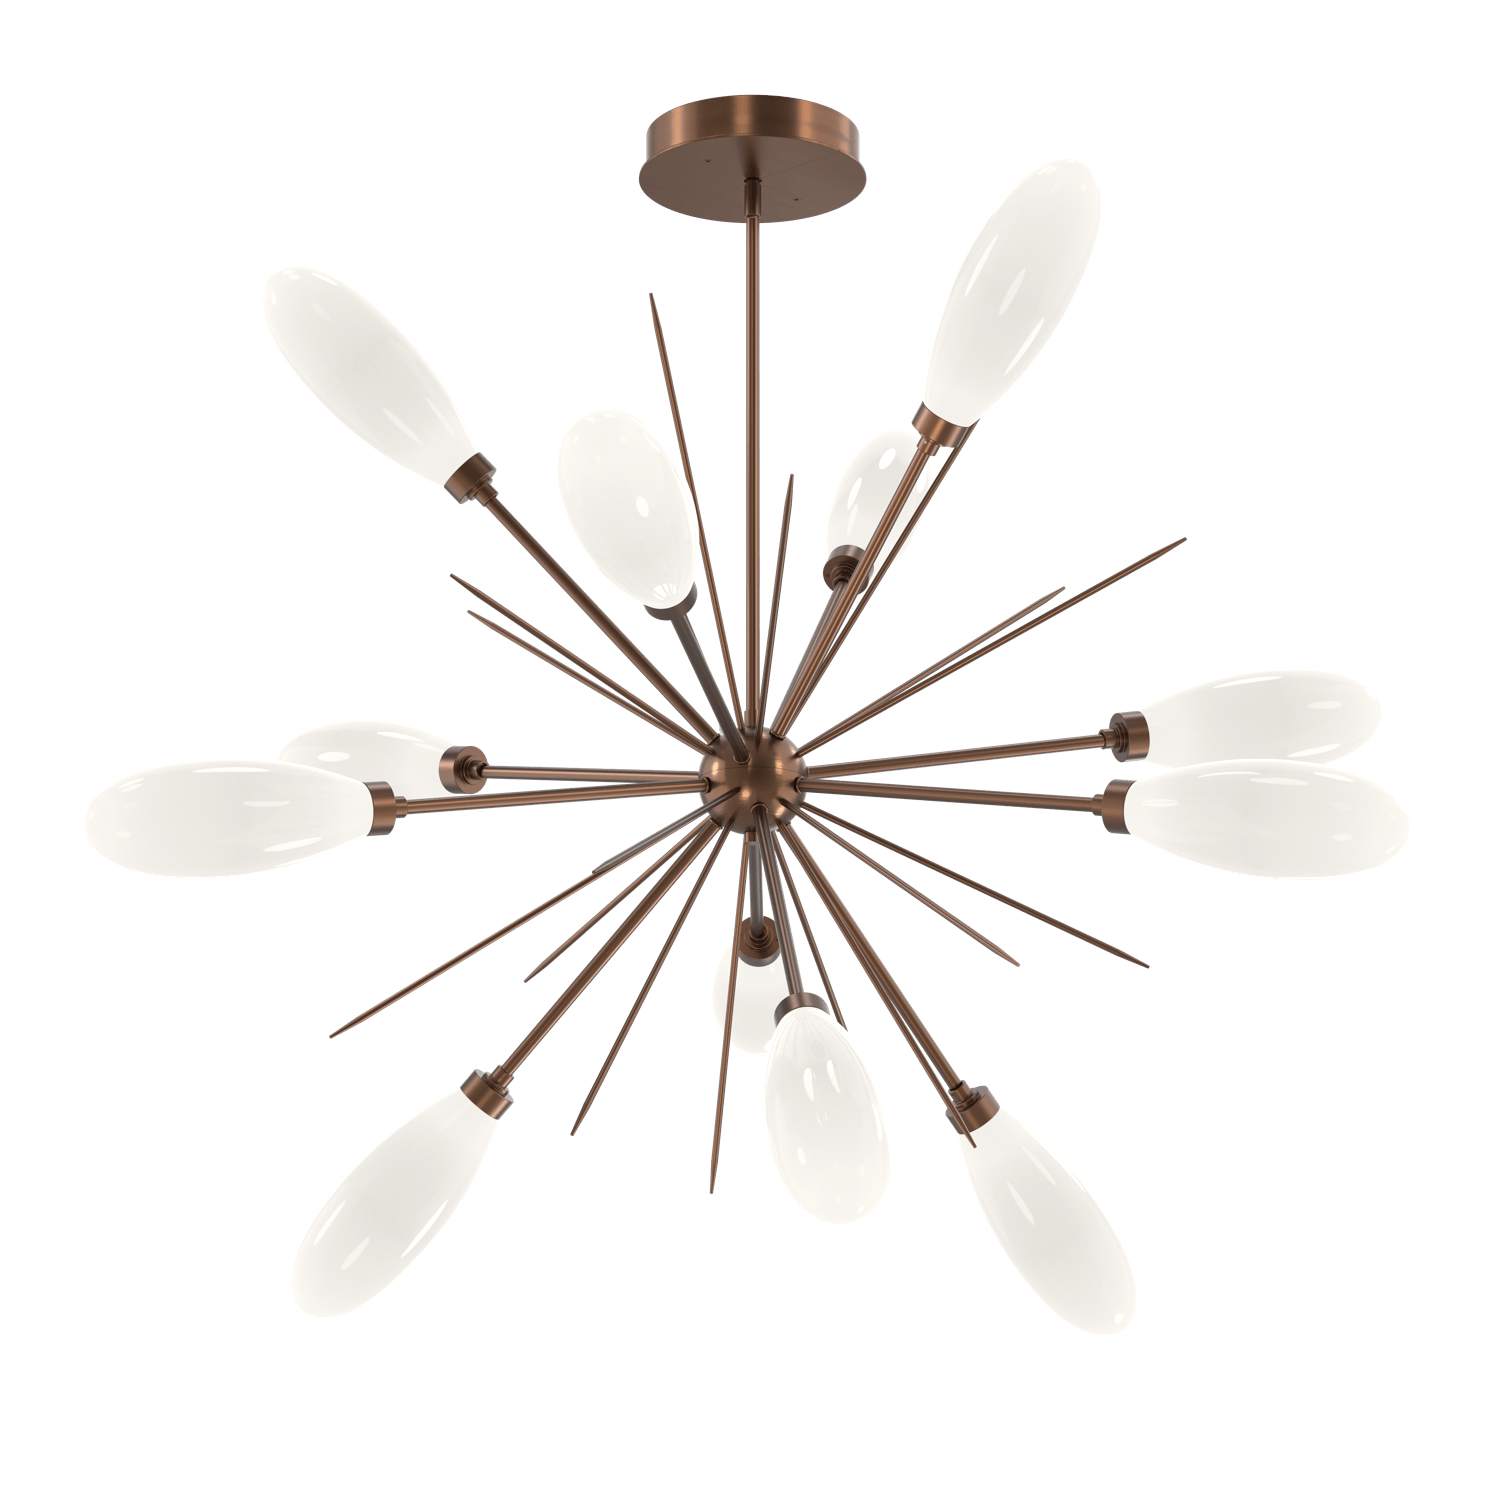 CHB0071-0B-RB-WL-LL-Hammerton-Studio-Fiori-34-inch-starburst-chandelier-with-satin-nickel-finish-and-opal-white-glass-shades-and-LED-lamping